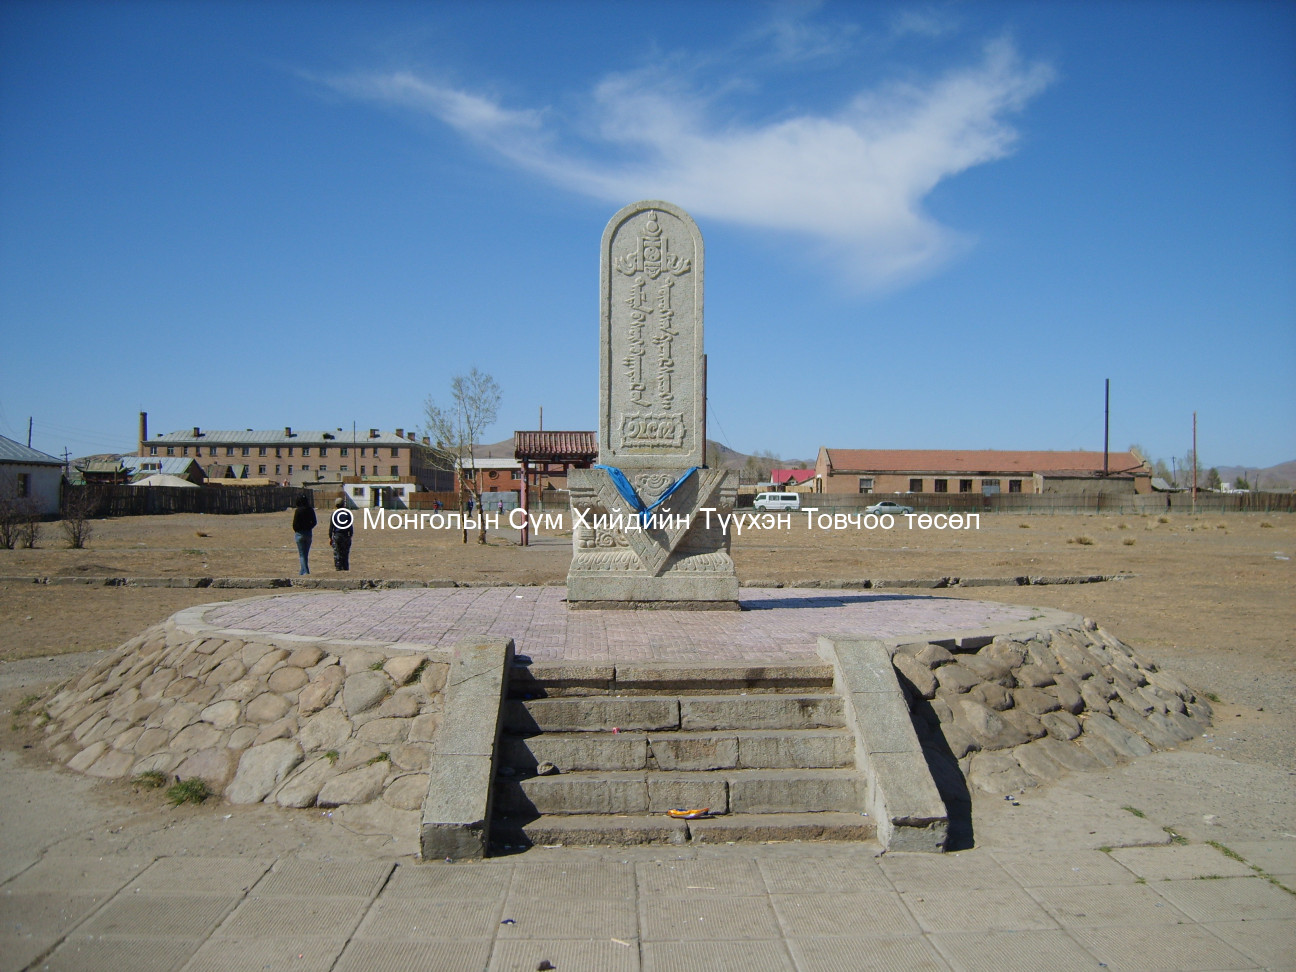 Memorial Place of D. Sükhbaatar in the East of Tar